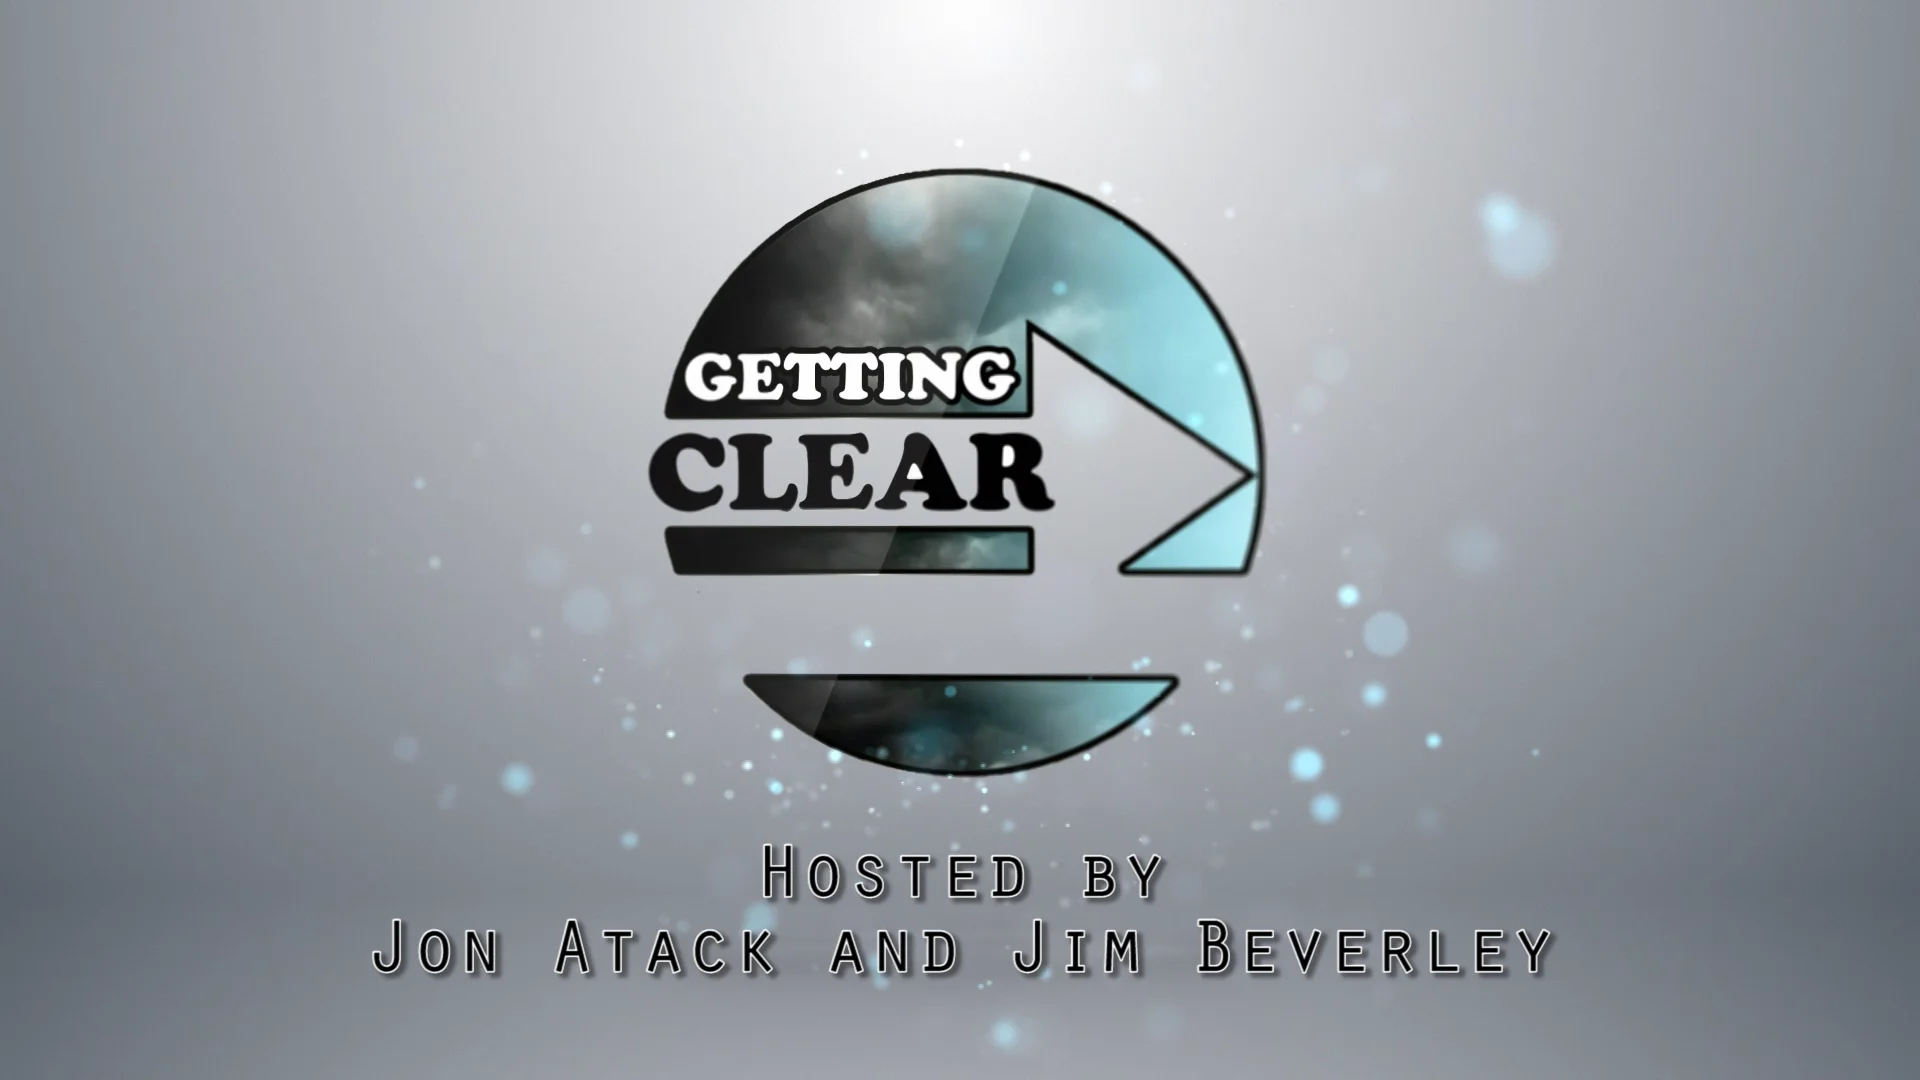 Watch The Toronto Getting Clear Conference On Scientology Hosted By Jon Atack And Jim Beverley